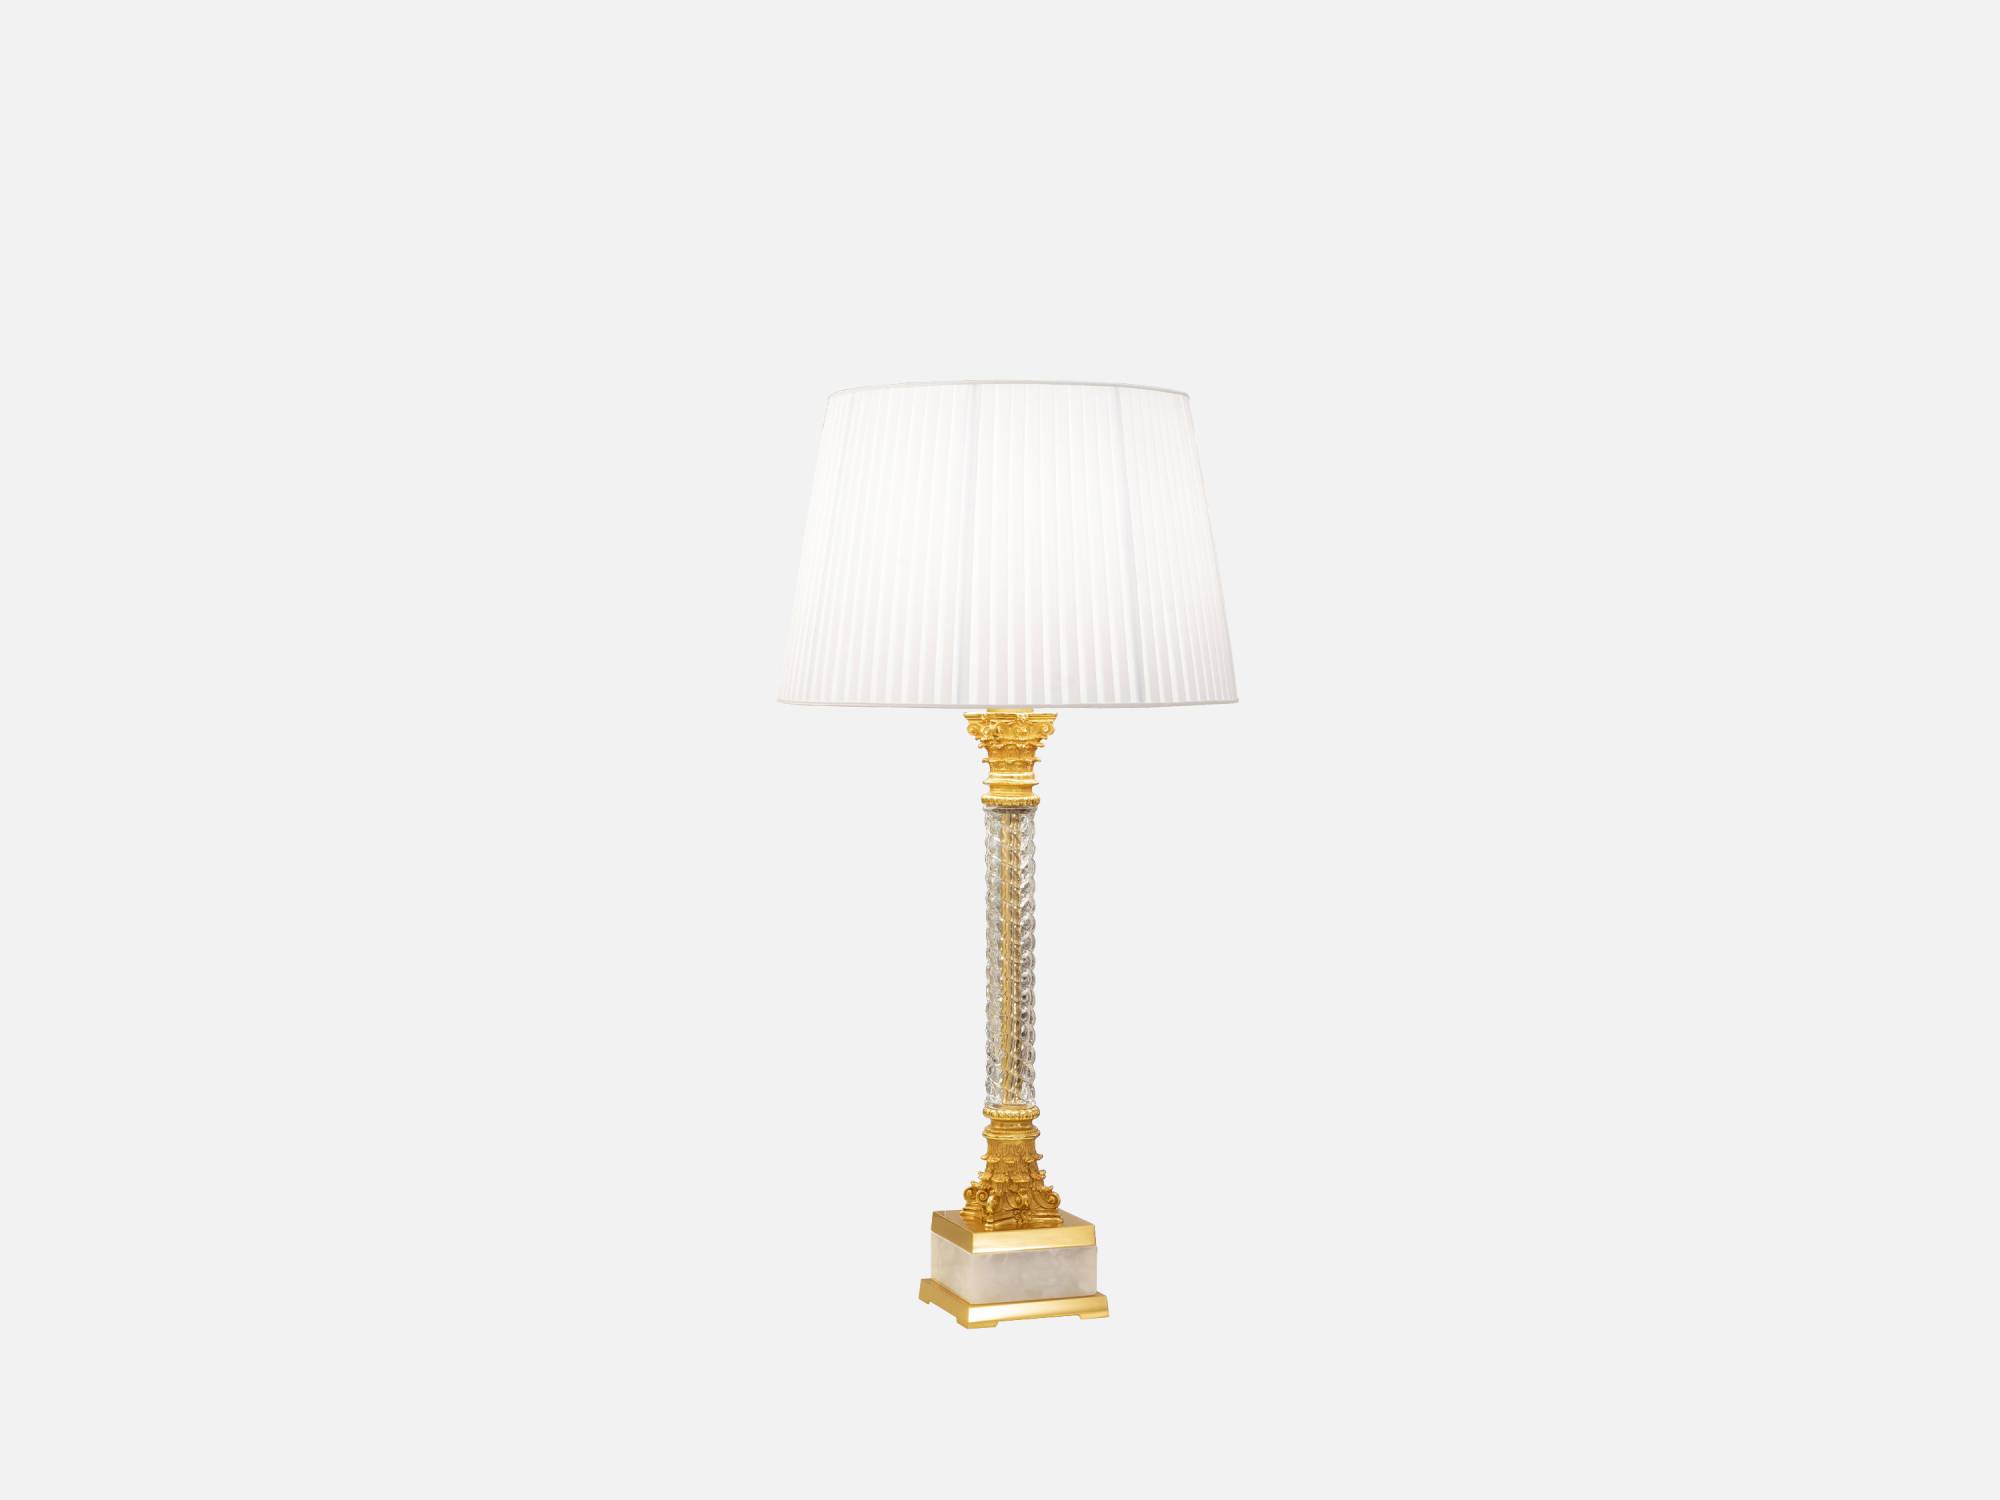 ART. 2302 – The elegance of luxury classic Lighting made in Italy by C.G. Capelletti.